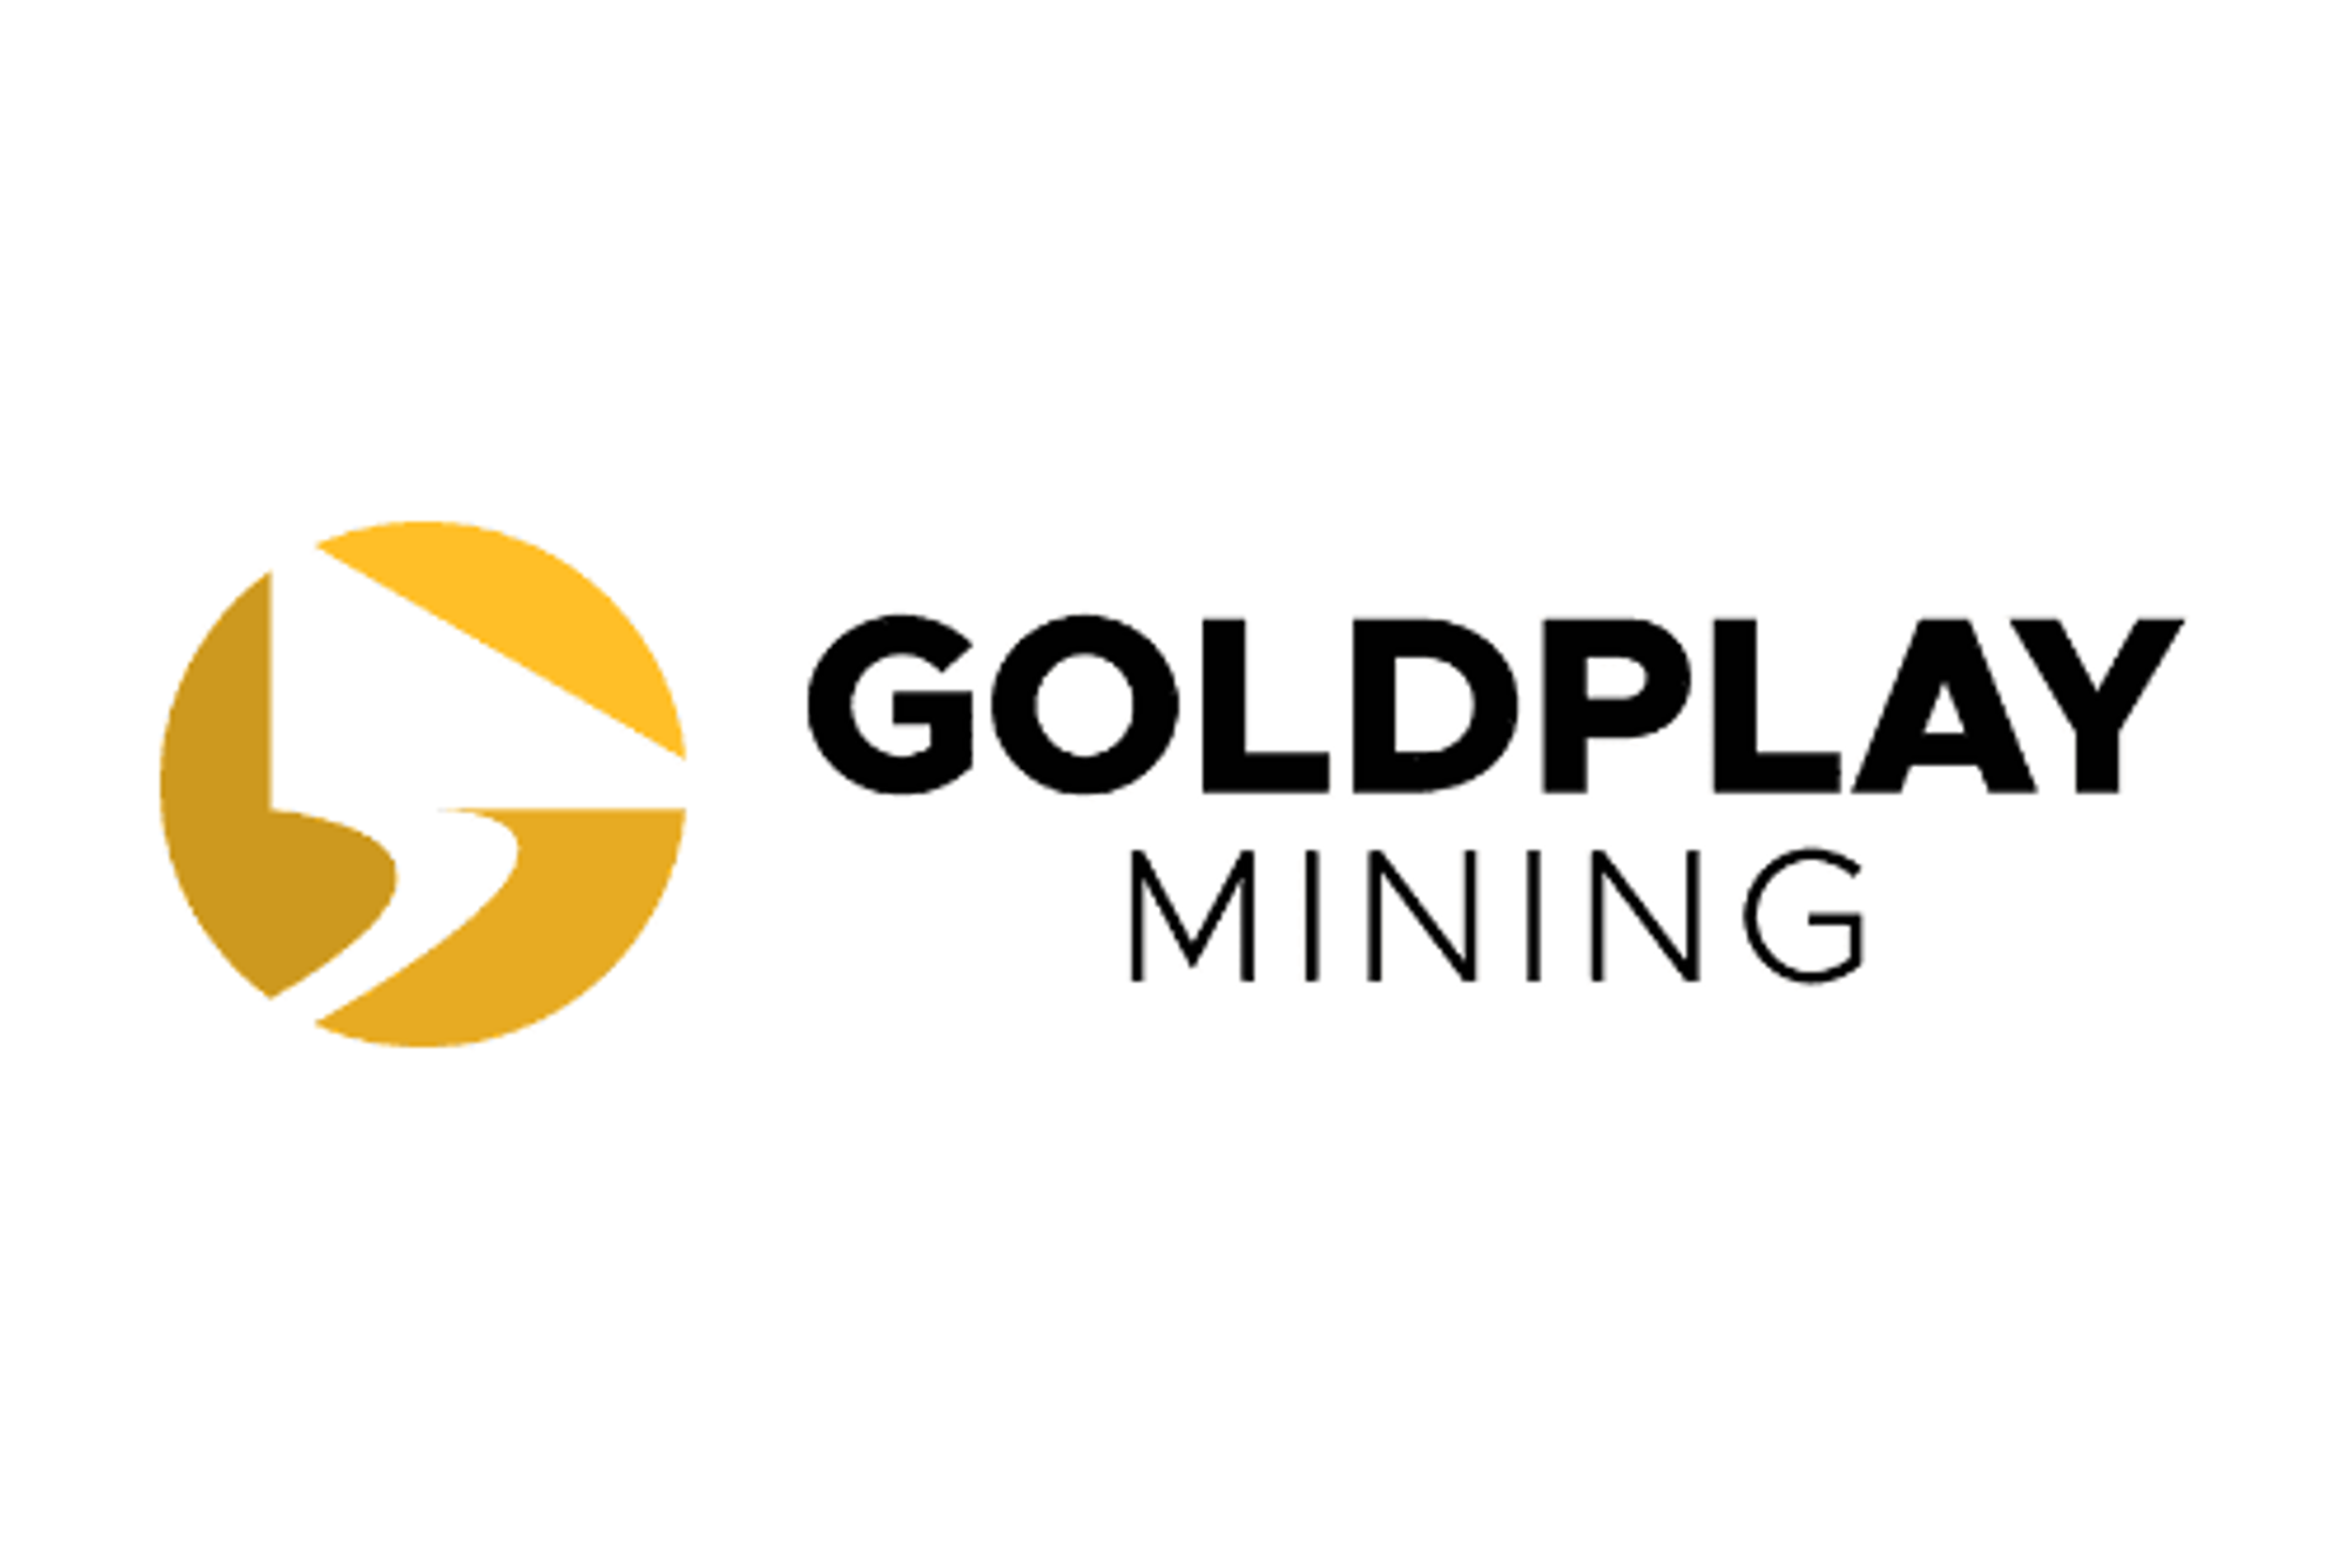 Goldplay Drills 12.2m of 1.18% Copper, Including 5.5m of 2.33 % Copper at Aparis Mine, In Southern Portugal